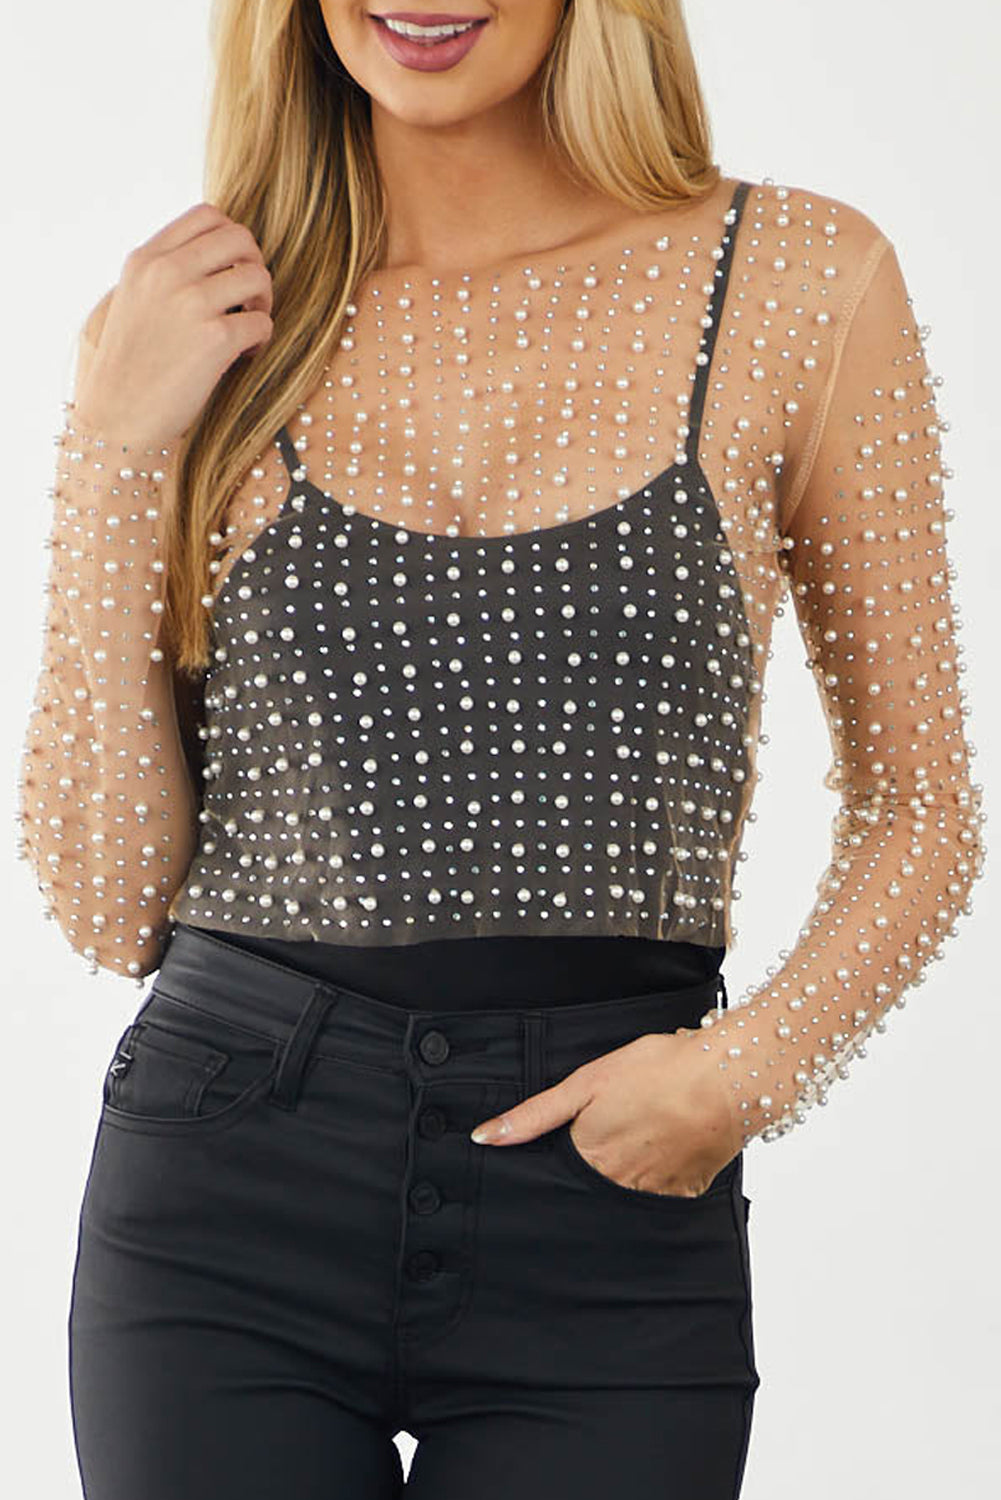 Black Pearl and Rhinestone Decor Sheer Cropped Top without Camisole